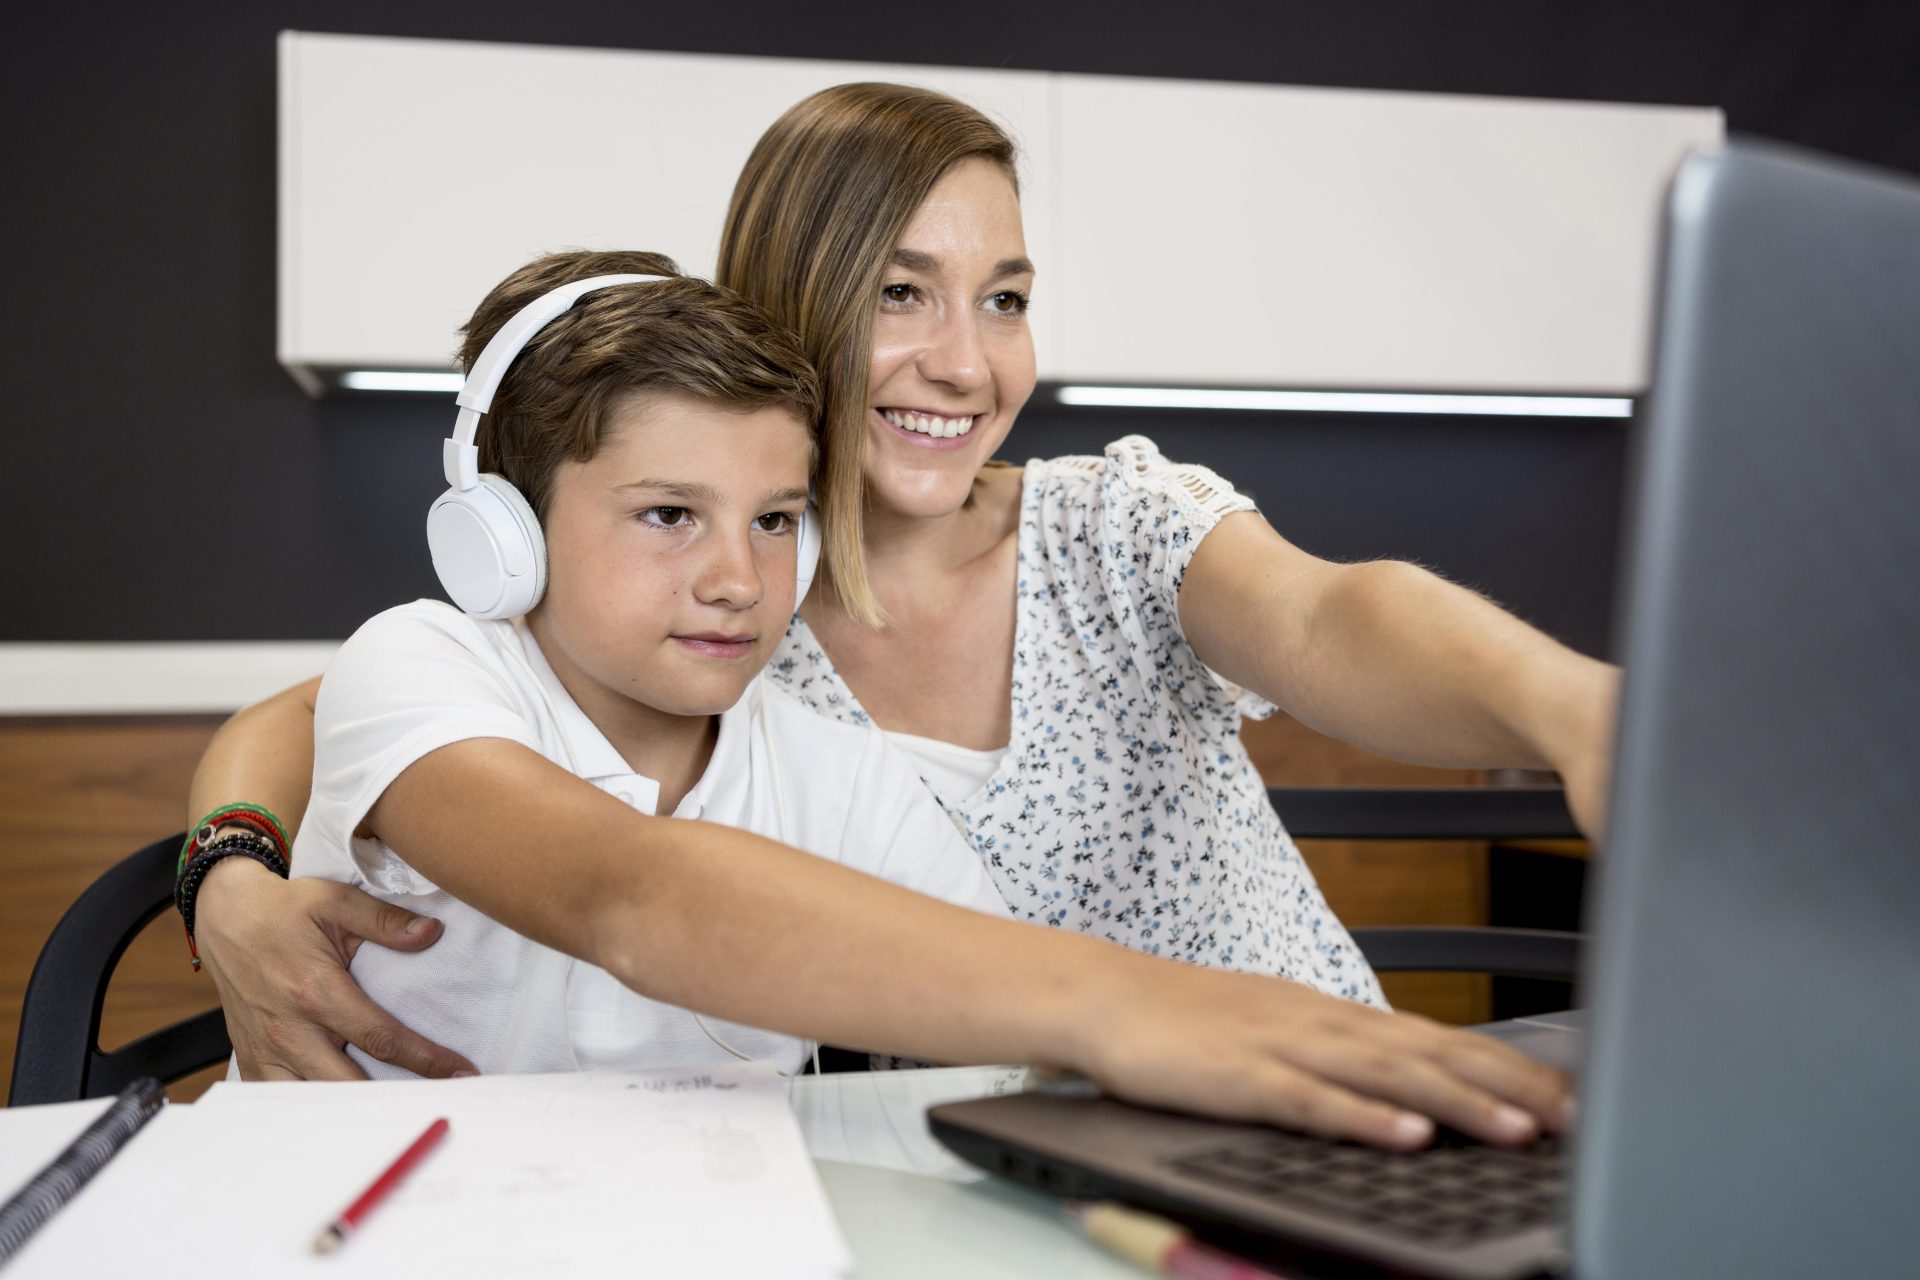 Internet Schooling: The Benefits of Online Education for Students